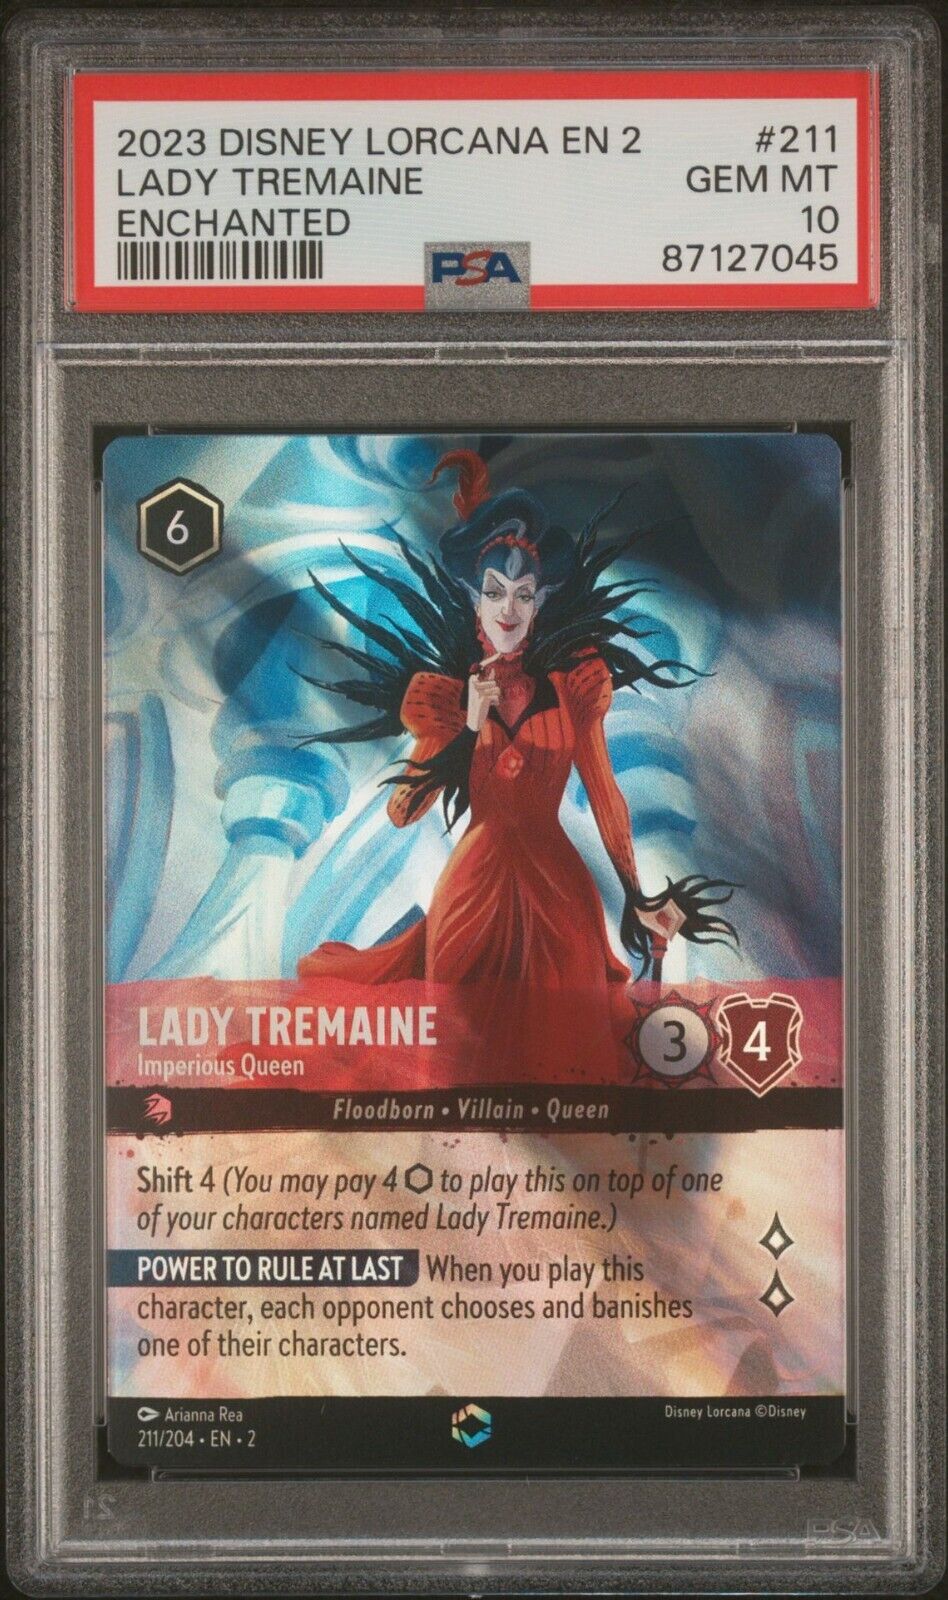 Disney Lorcana Lady Tremaine Imperious Queen Enchanted PSA 10